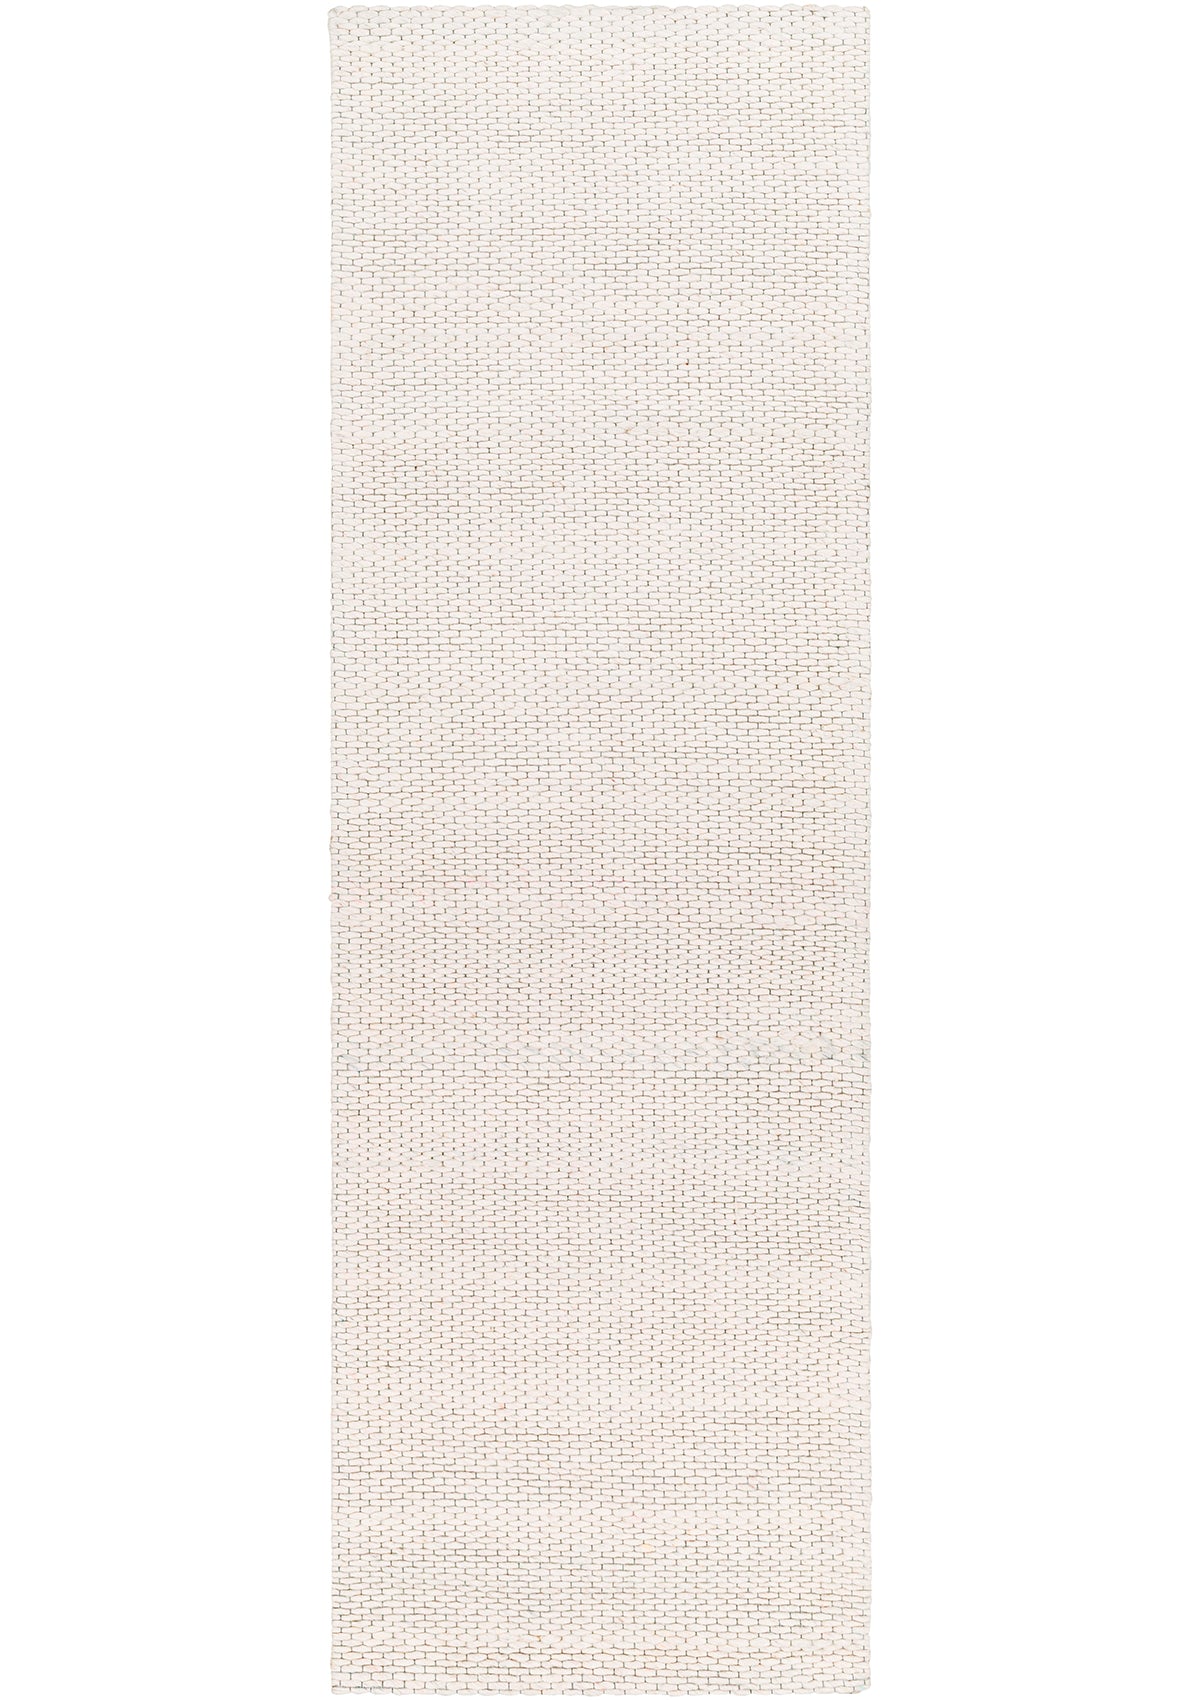 The Olaine Wool rug comes in both runner and area rug sizes. 